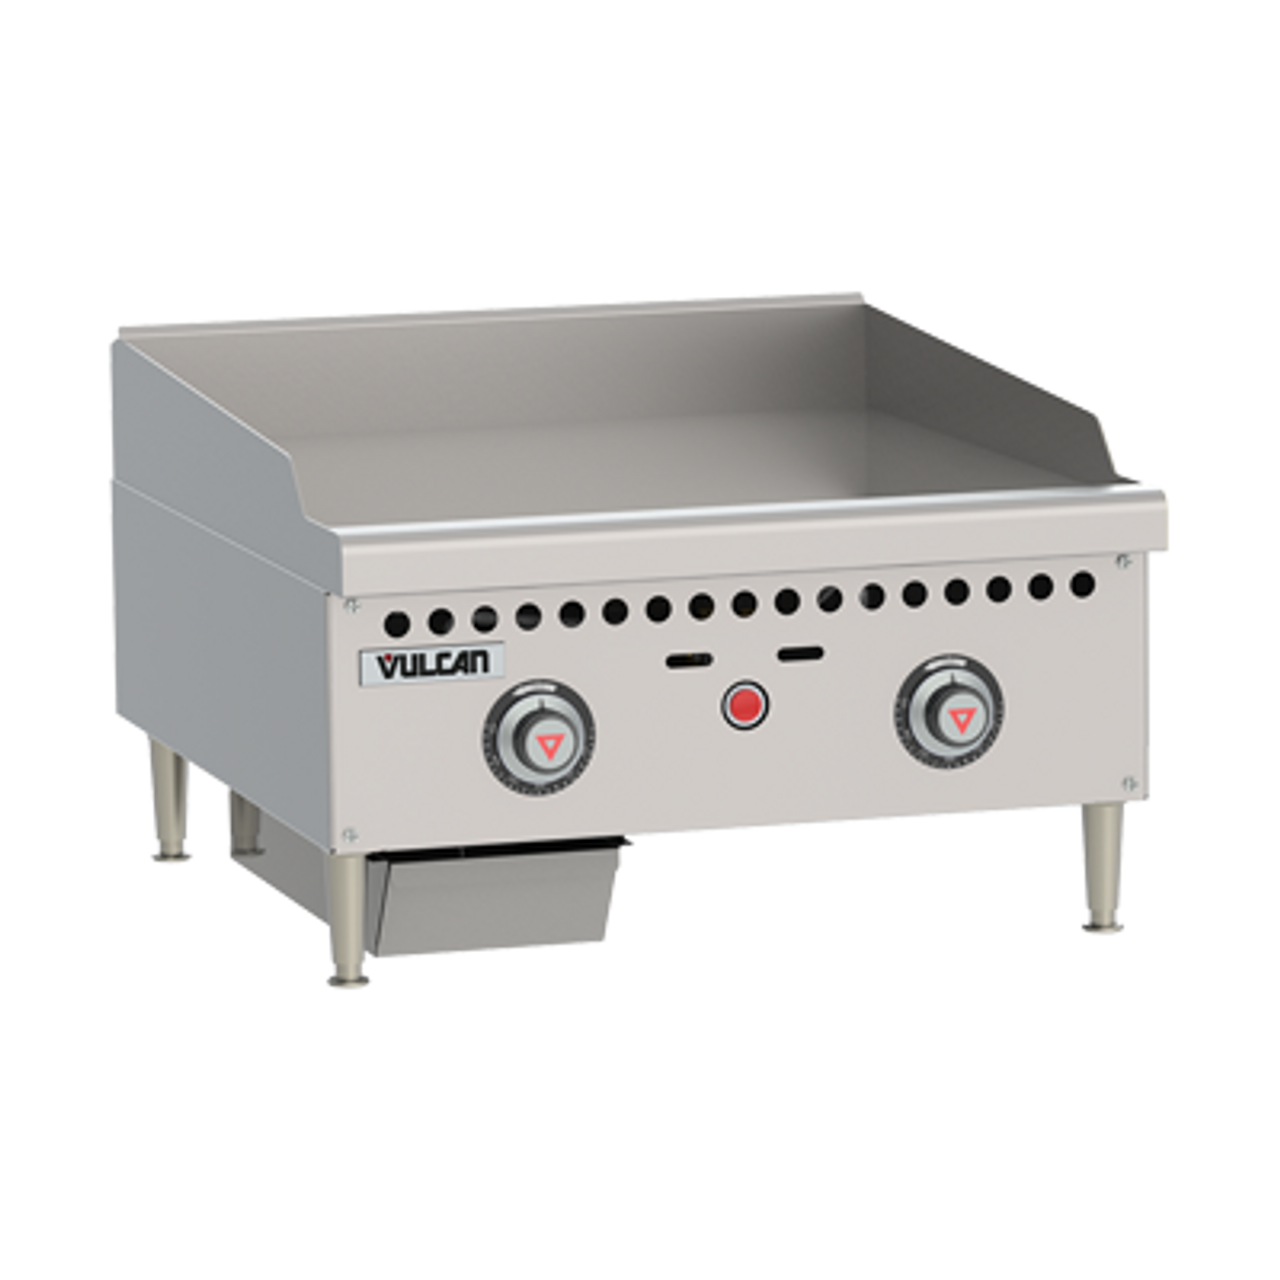 Griddle, countertop, gas, 48" W x 20-1/2" D cooking surface, 1" thick polished steel griddle plate, (4) burners, fully welded, manual control valve every 12", low profile, 4-1/2" grease can capacity, (1) burner, stainless steel front, sides & front top ledge, 4" adjustable legs, 100,000 BTU, CSA, NSF